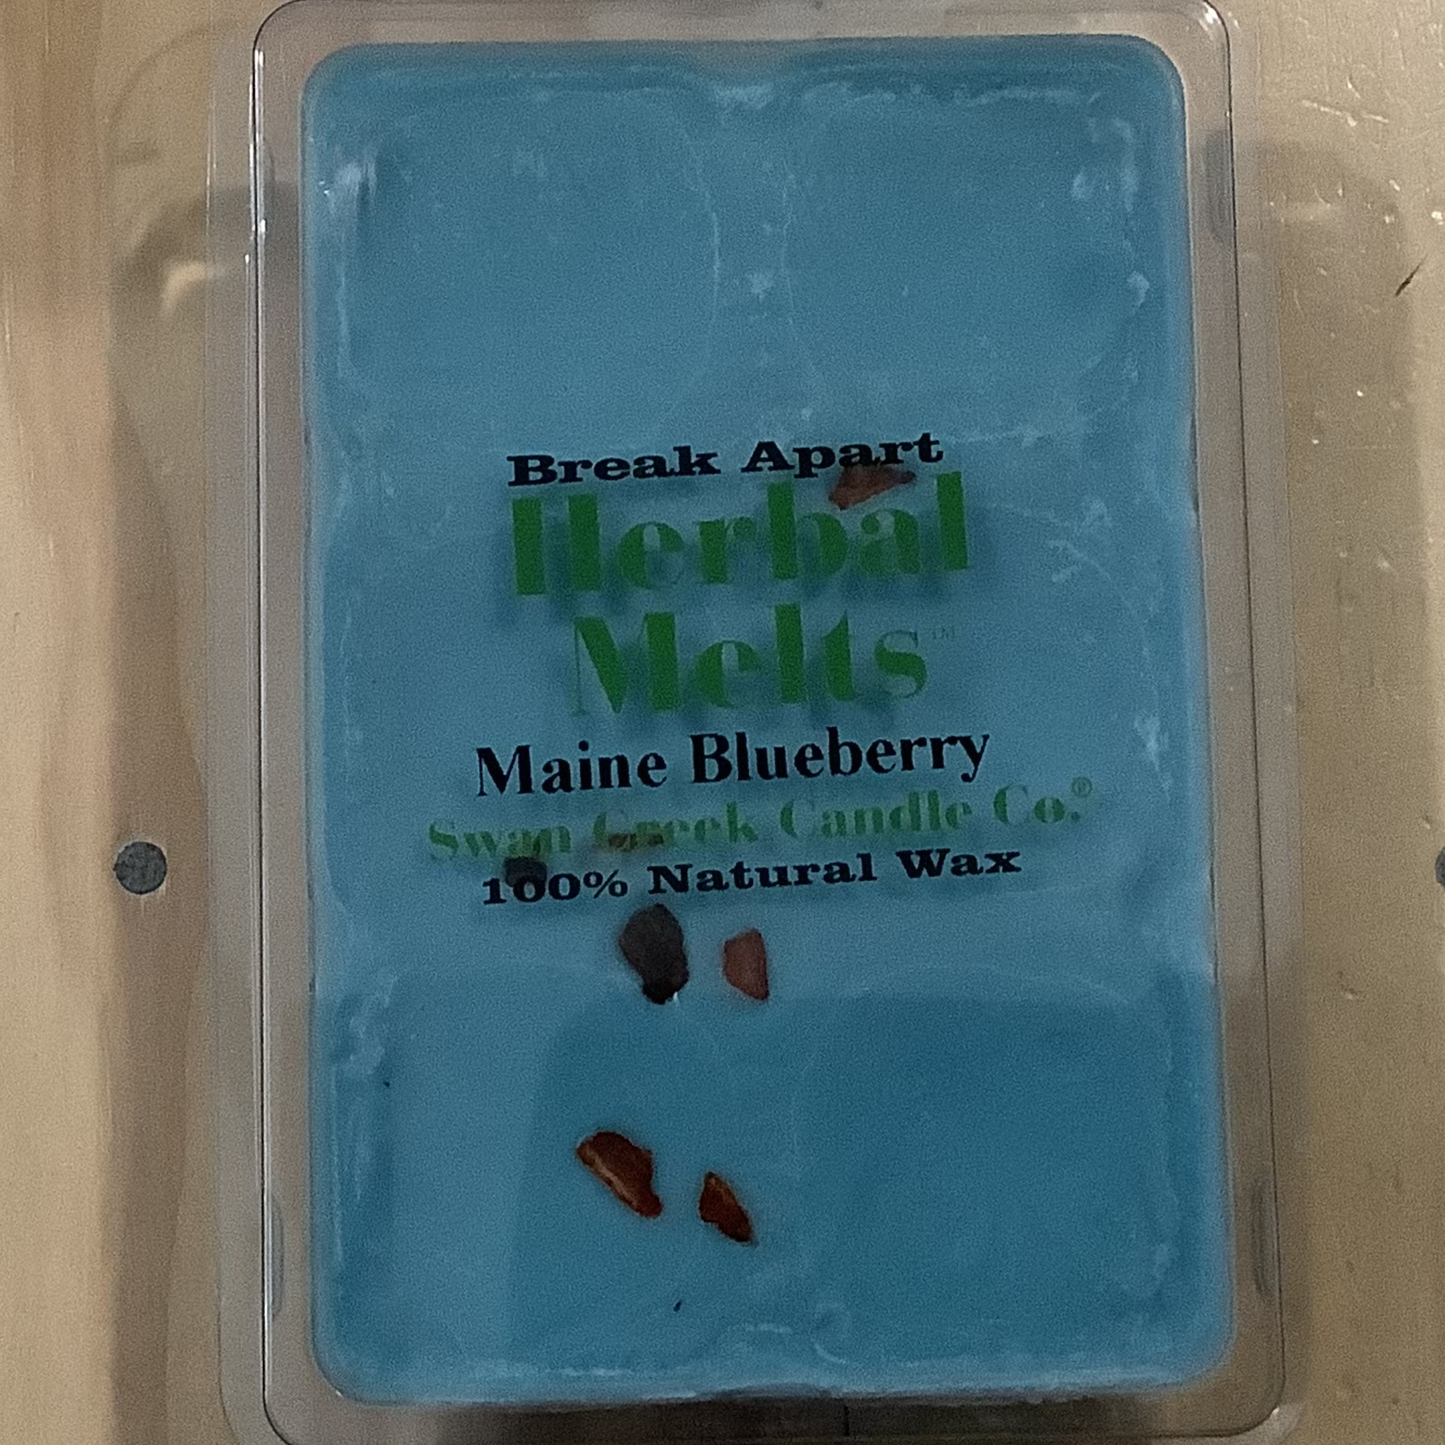 Maine Blueberry Herbal Melts